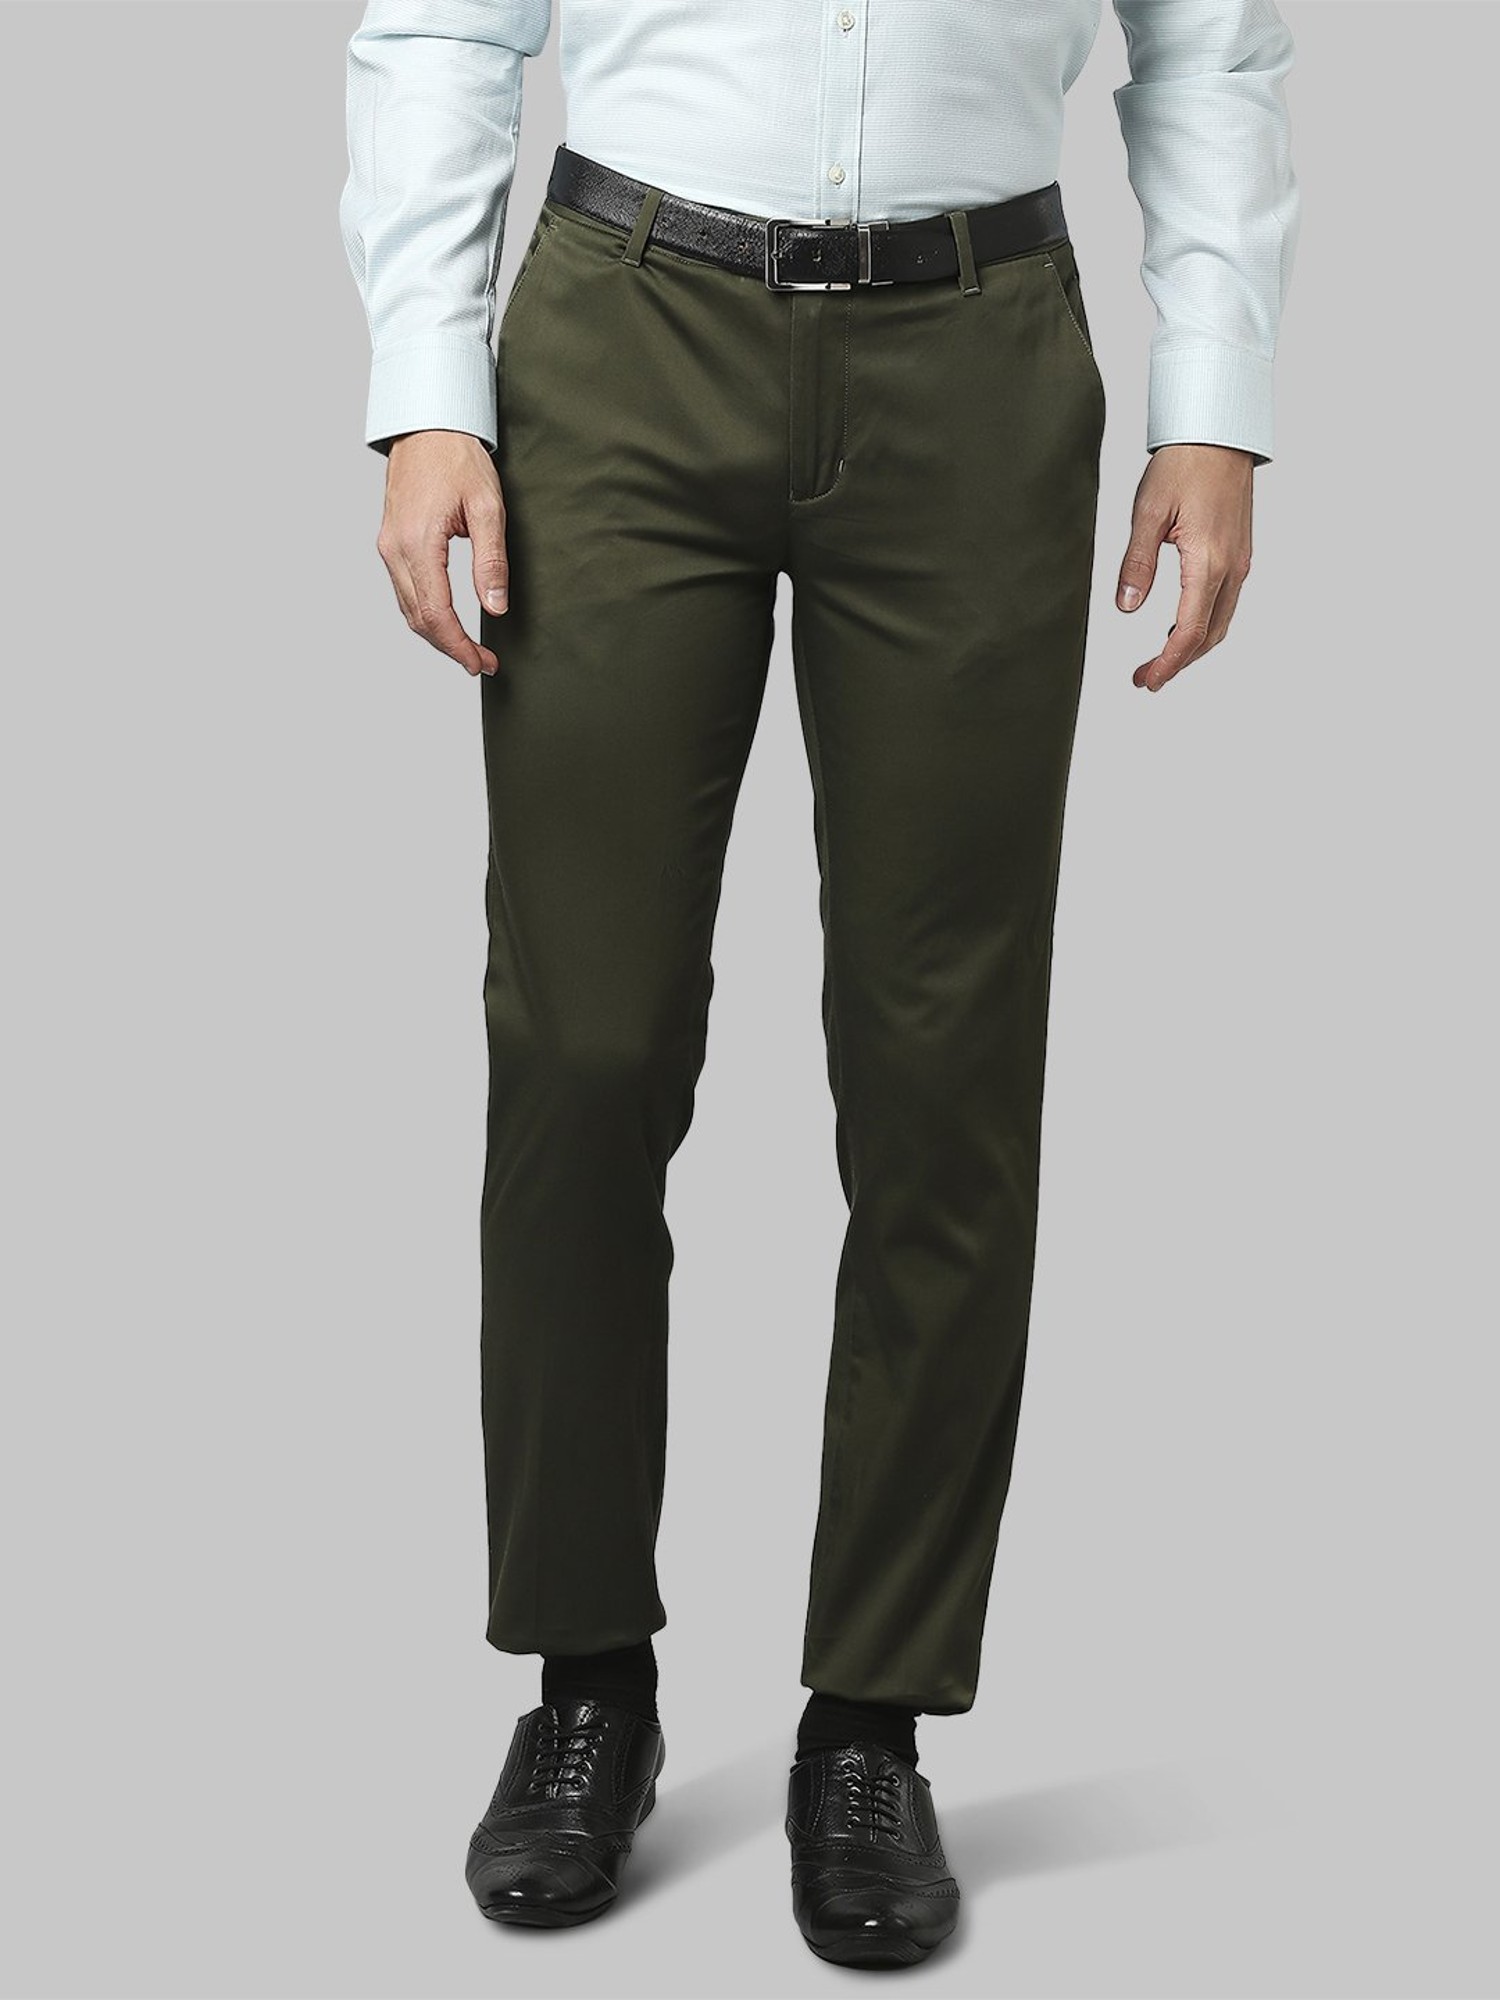 Buy Raymond Men Solid Slim Fit Formal Trouser  Green Online at Low Prices  in India  Paytmmallcom